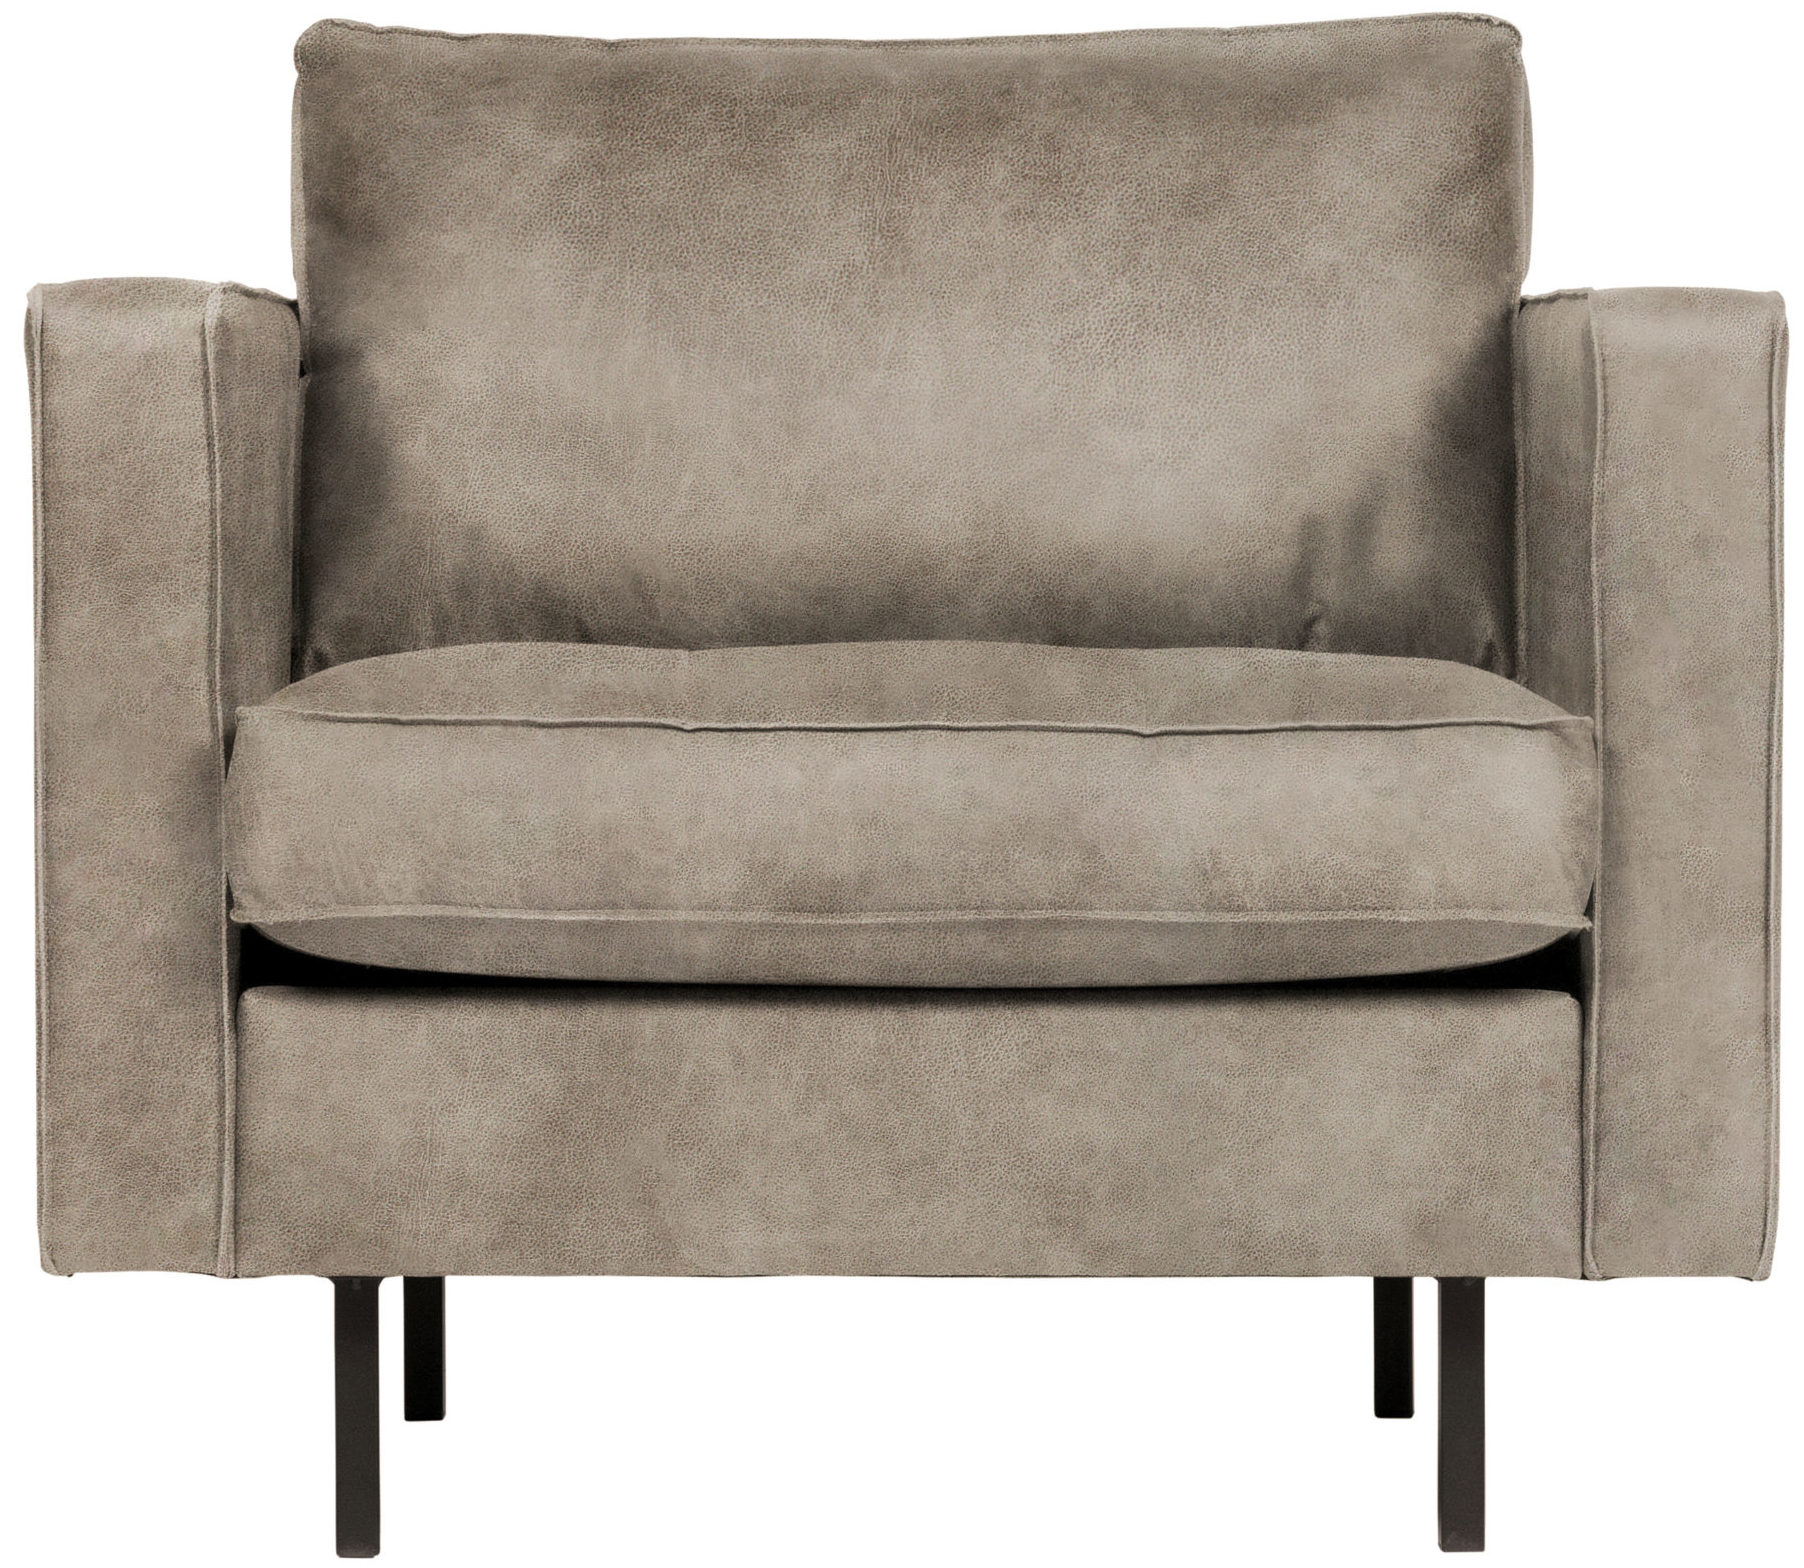 Rodeo Classic Fauteuil - Elephant Skin